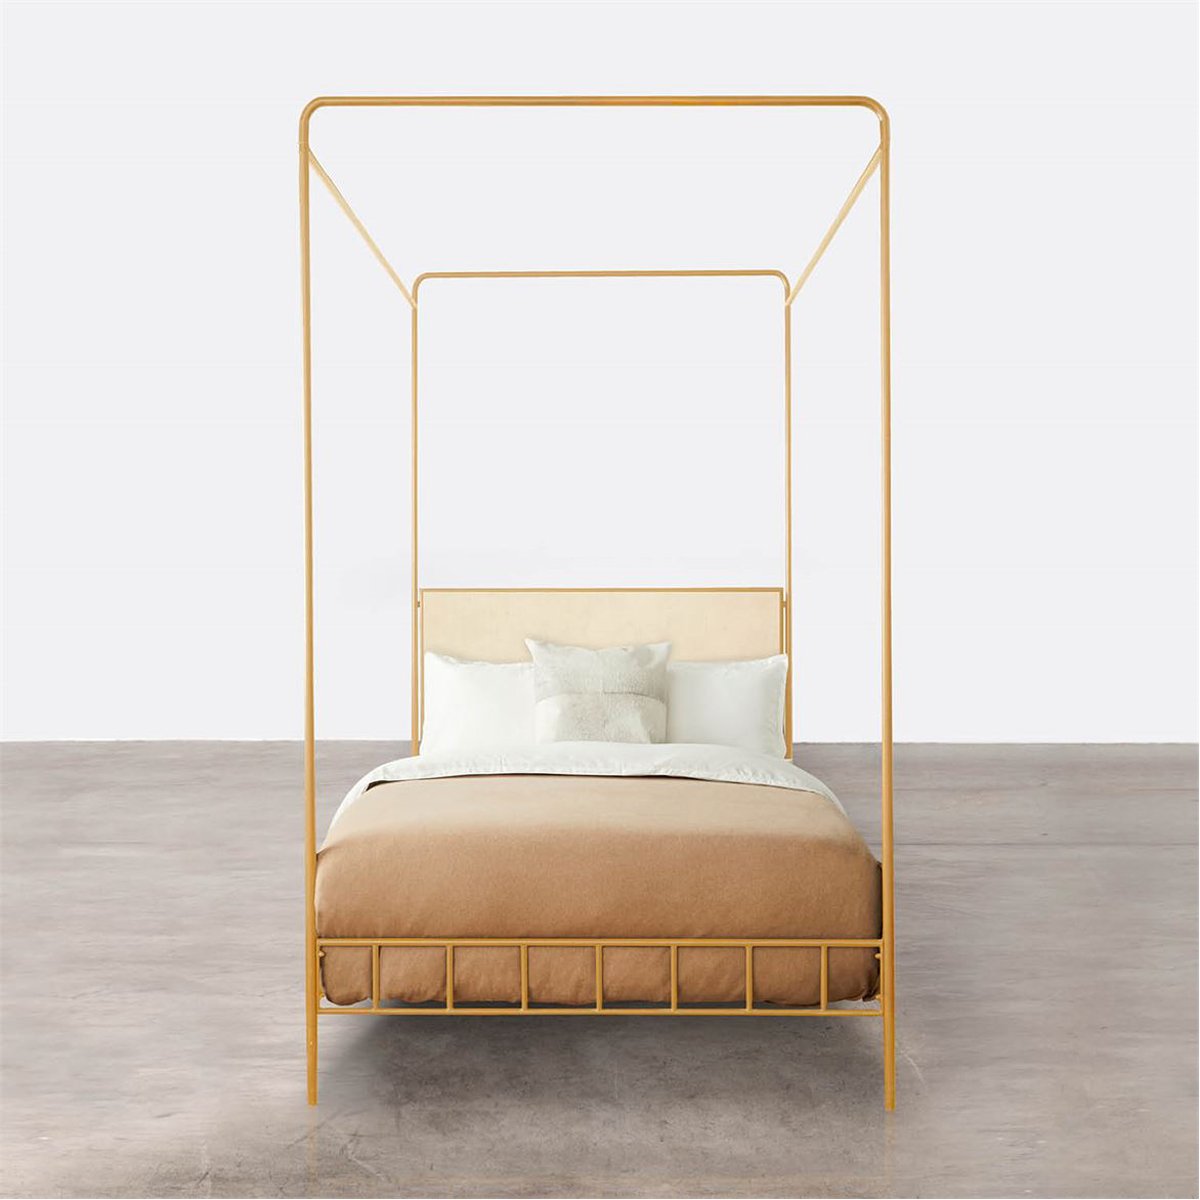 Made Goods Laken Iron Canopy Bed in Faux Shagreen